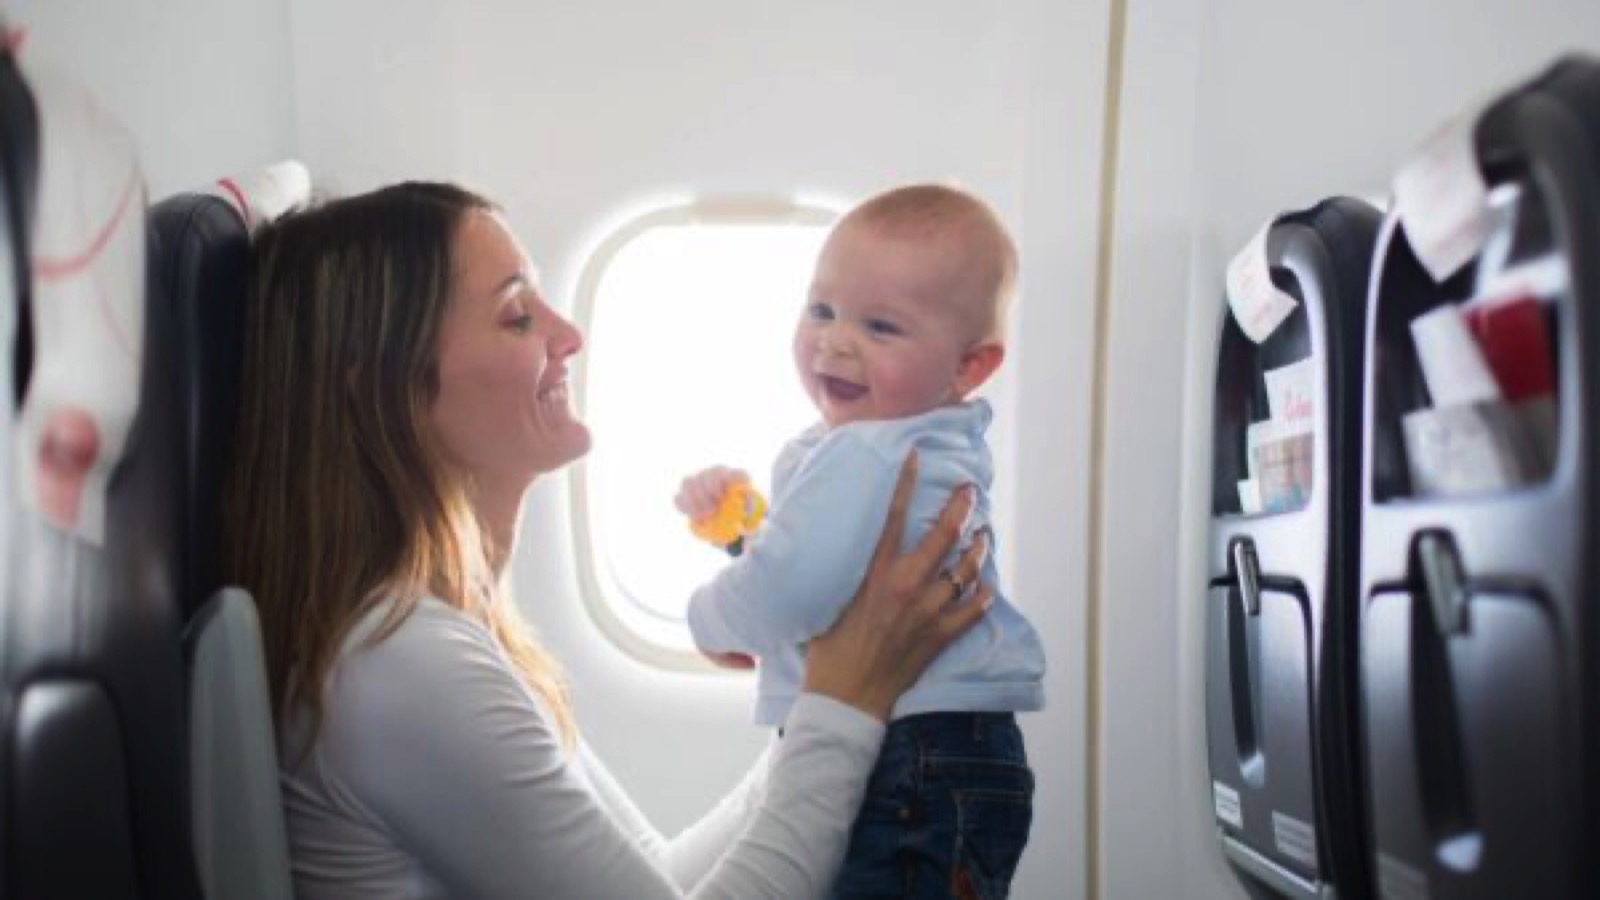 <p>Sometimes, traveling abroad is already challenging enough on our own. But with a toddler, it can be way more than that yet it's a truly rewarding experience. For a smooth and stress-free international trip with your little ones, it's essential to be well-prepared before, during, and after the flight—this sparked a couple's interest and made them ask for some tips in an online forum.</p>